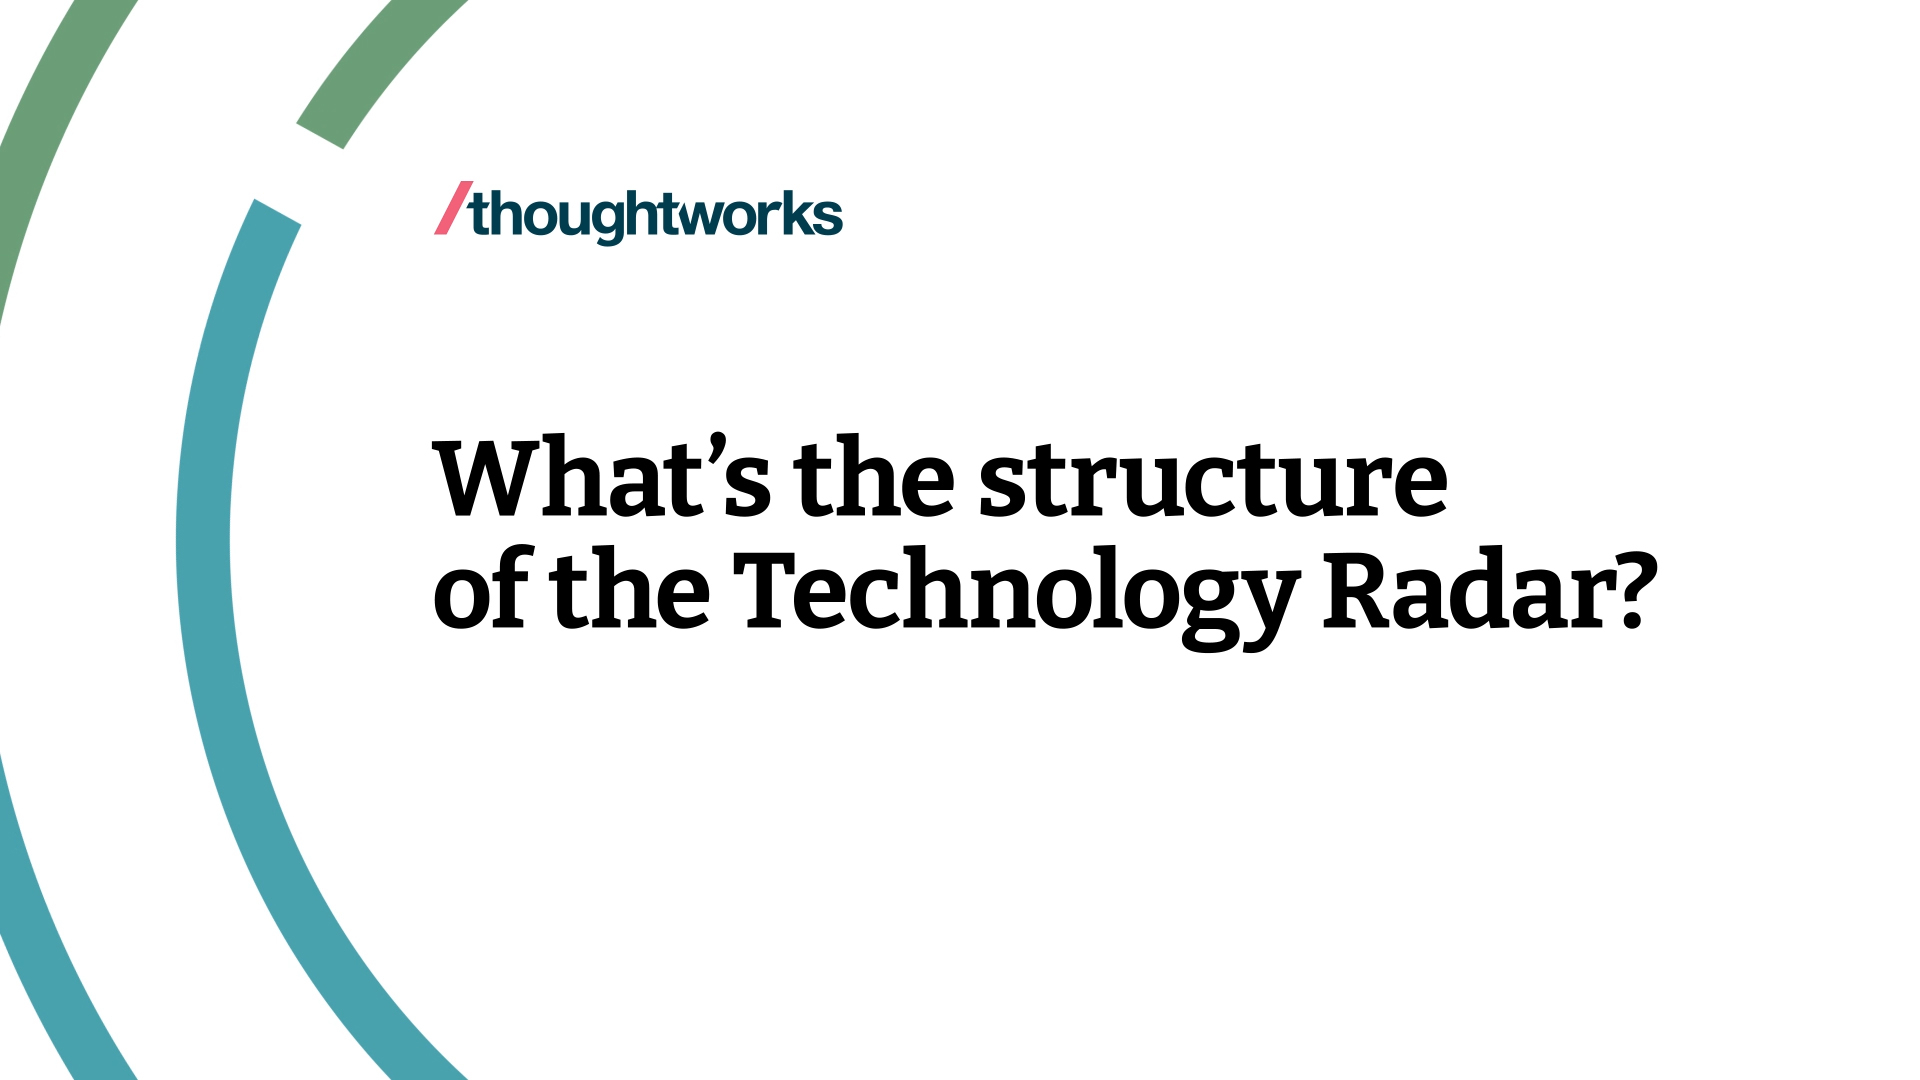 Watch and learn about the structure of Thoughtworks Tech Radar. It's all about tracking interesting things, which we refer to as blips. We organize the blips in the Radar using two categorizing elements: quadrants and rings. The quadrants represent different kinds of blips. The rings indicate what stage in an adoption lifecycle we think they should be in.